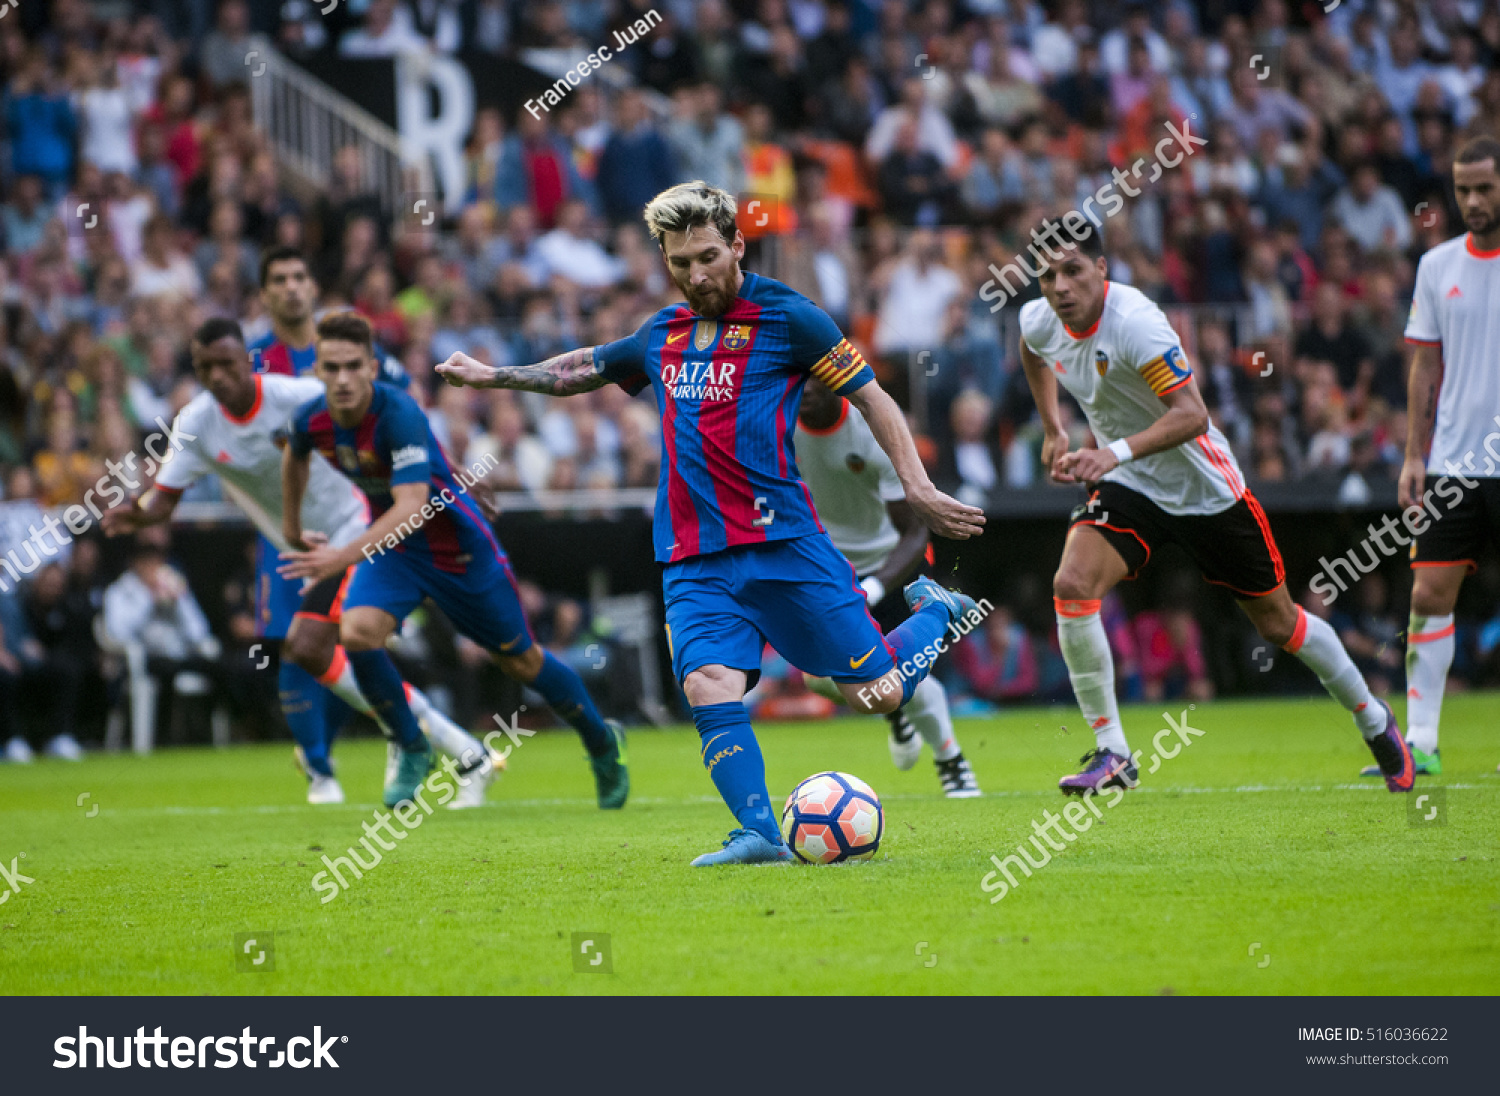 https://image.shutterstock.com/z/stock-photo-valencia-spain-october-messi-penalti-during-bbva-league-match-between-valencia-c-f-and-516036622.jpg